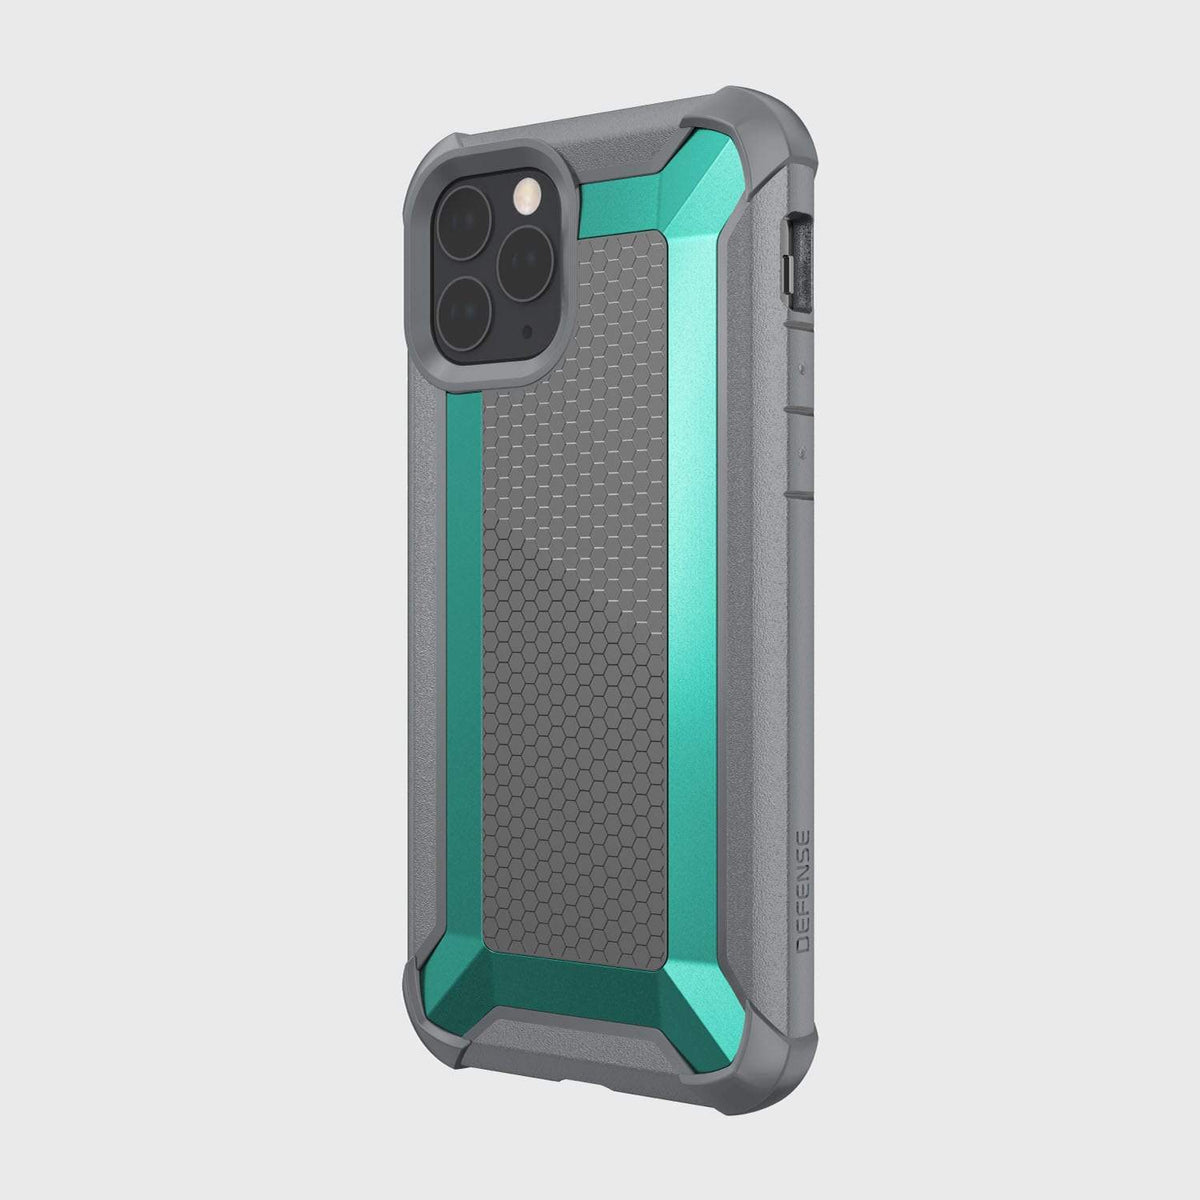 The back view of the Raptic iPhone 11 Pro Case - TACTICAL in grey and teal, providing a protective and shock-absorbing solution.